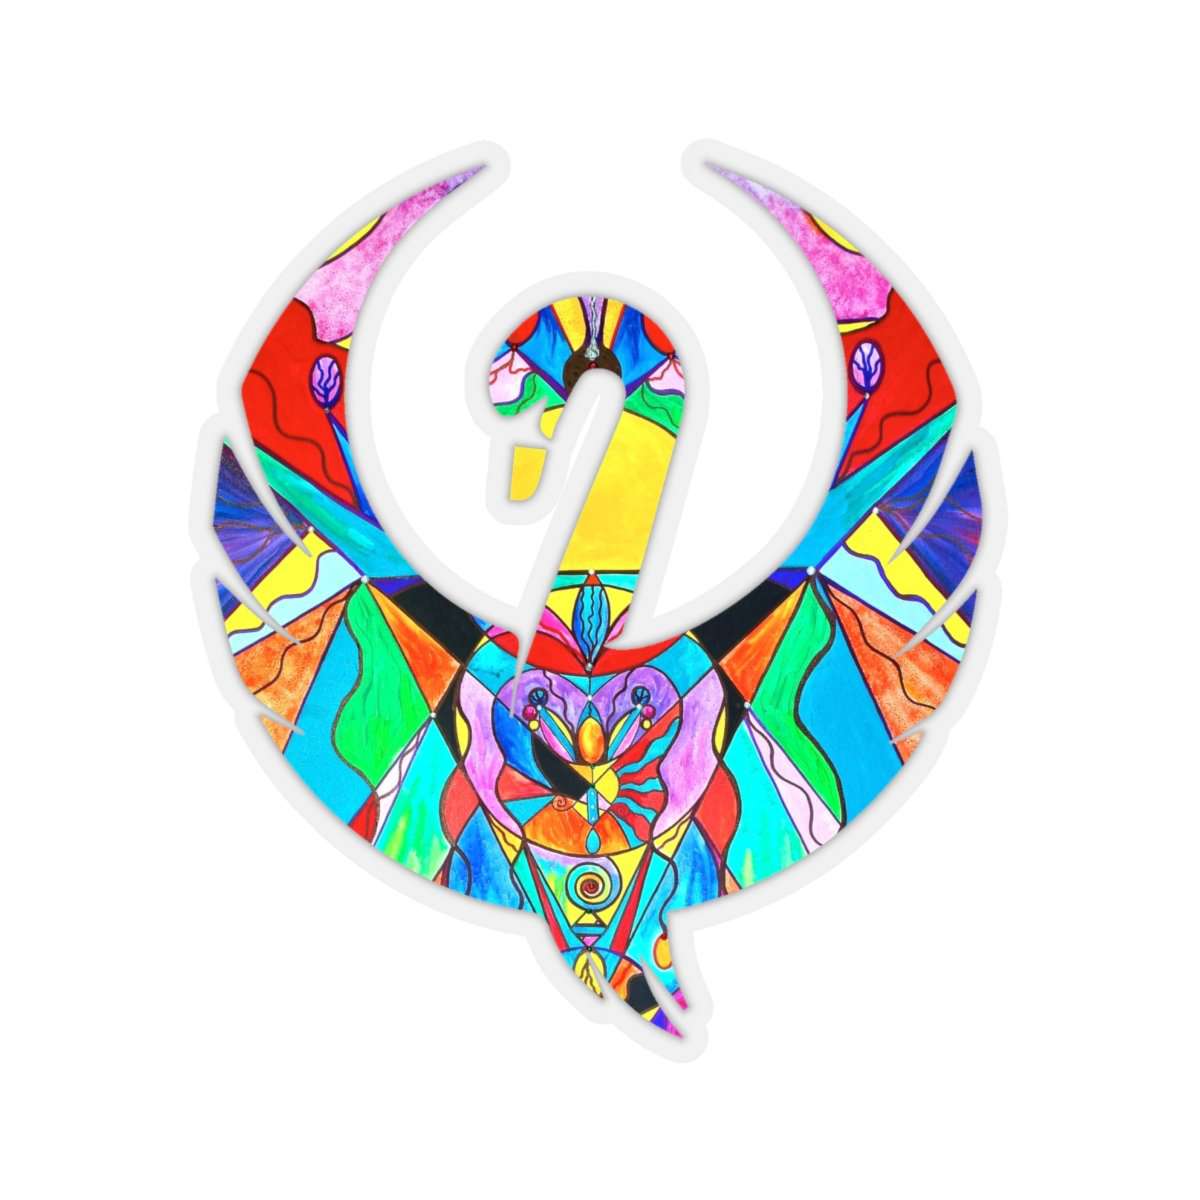 we-are-the-best-place-to-shop-arcturian-metamorphosis-grid-swan-stickers-sale_8.jpg